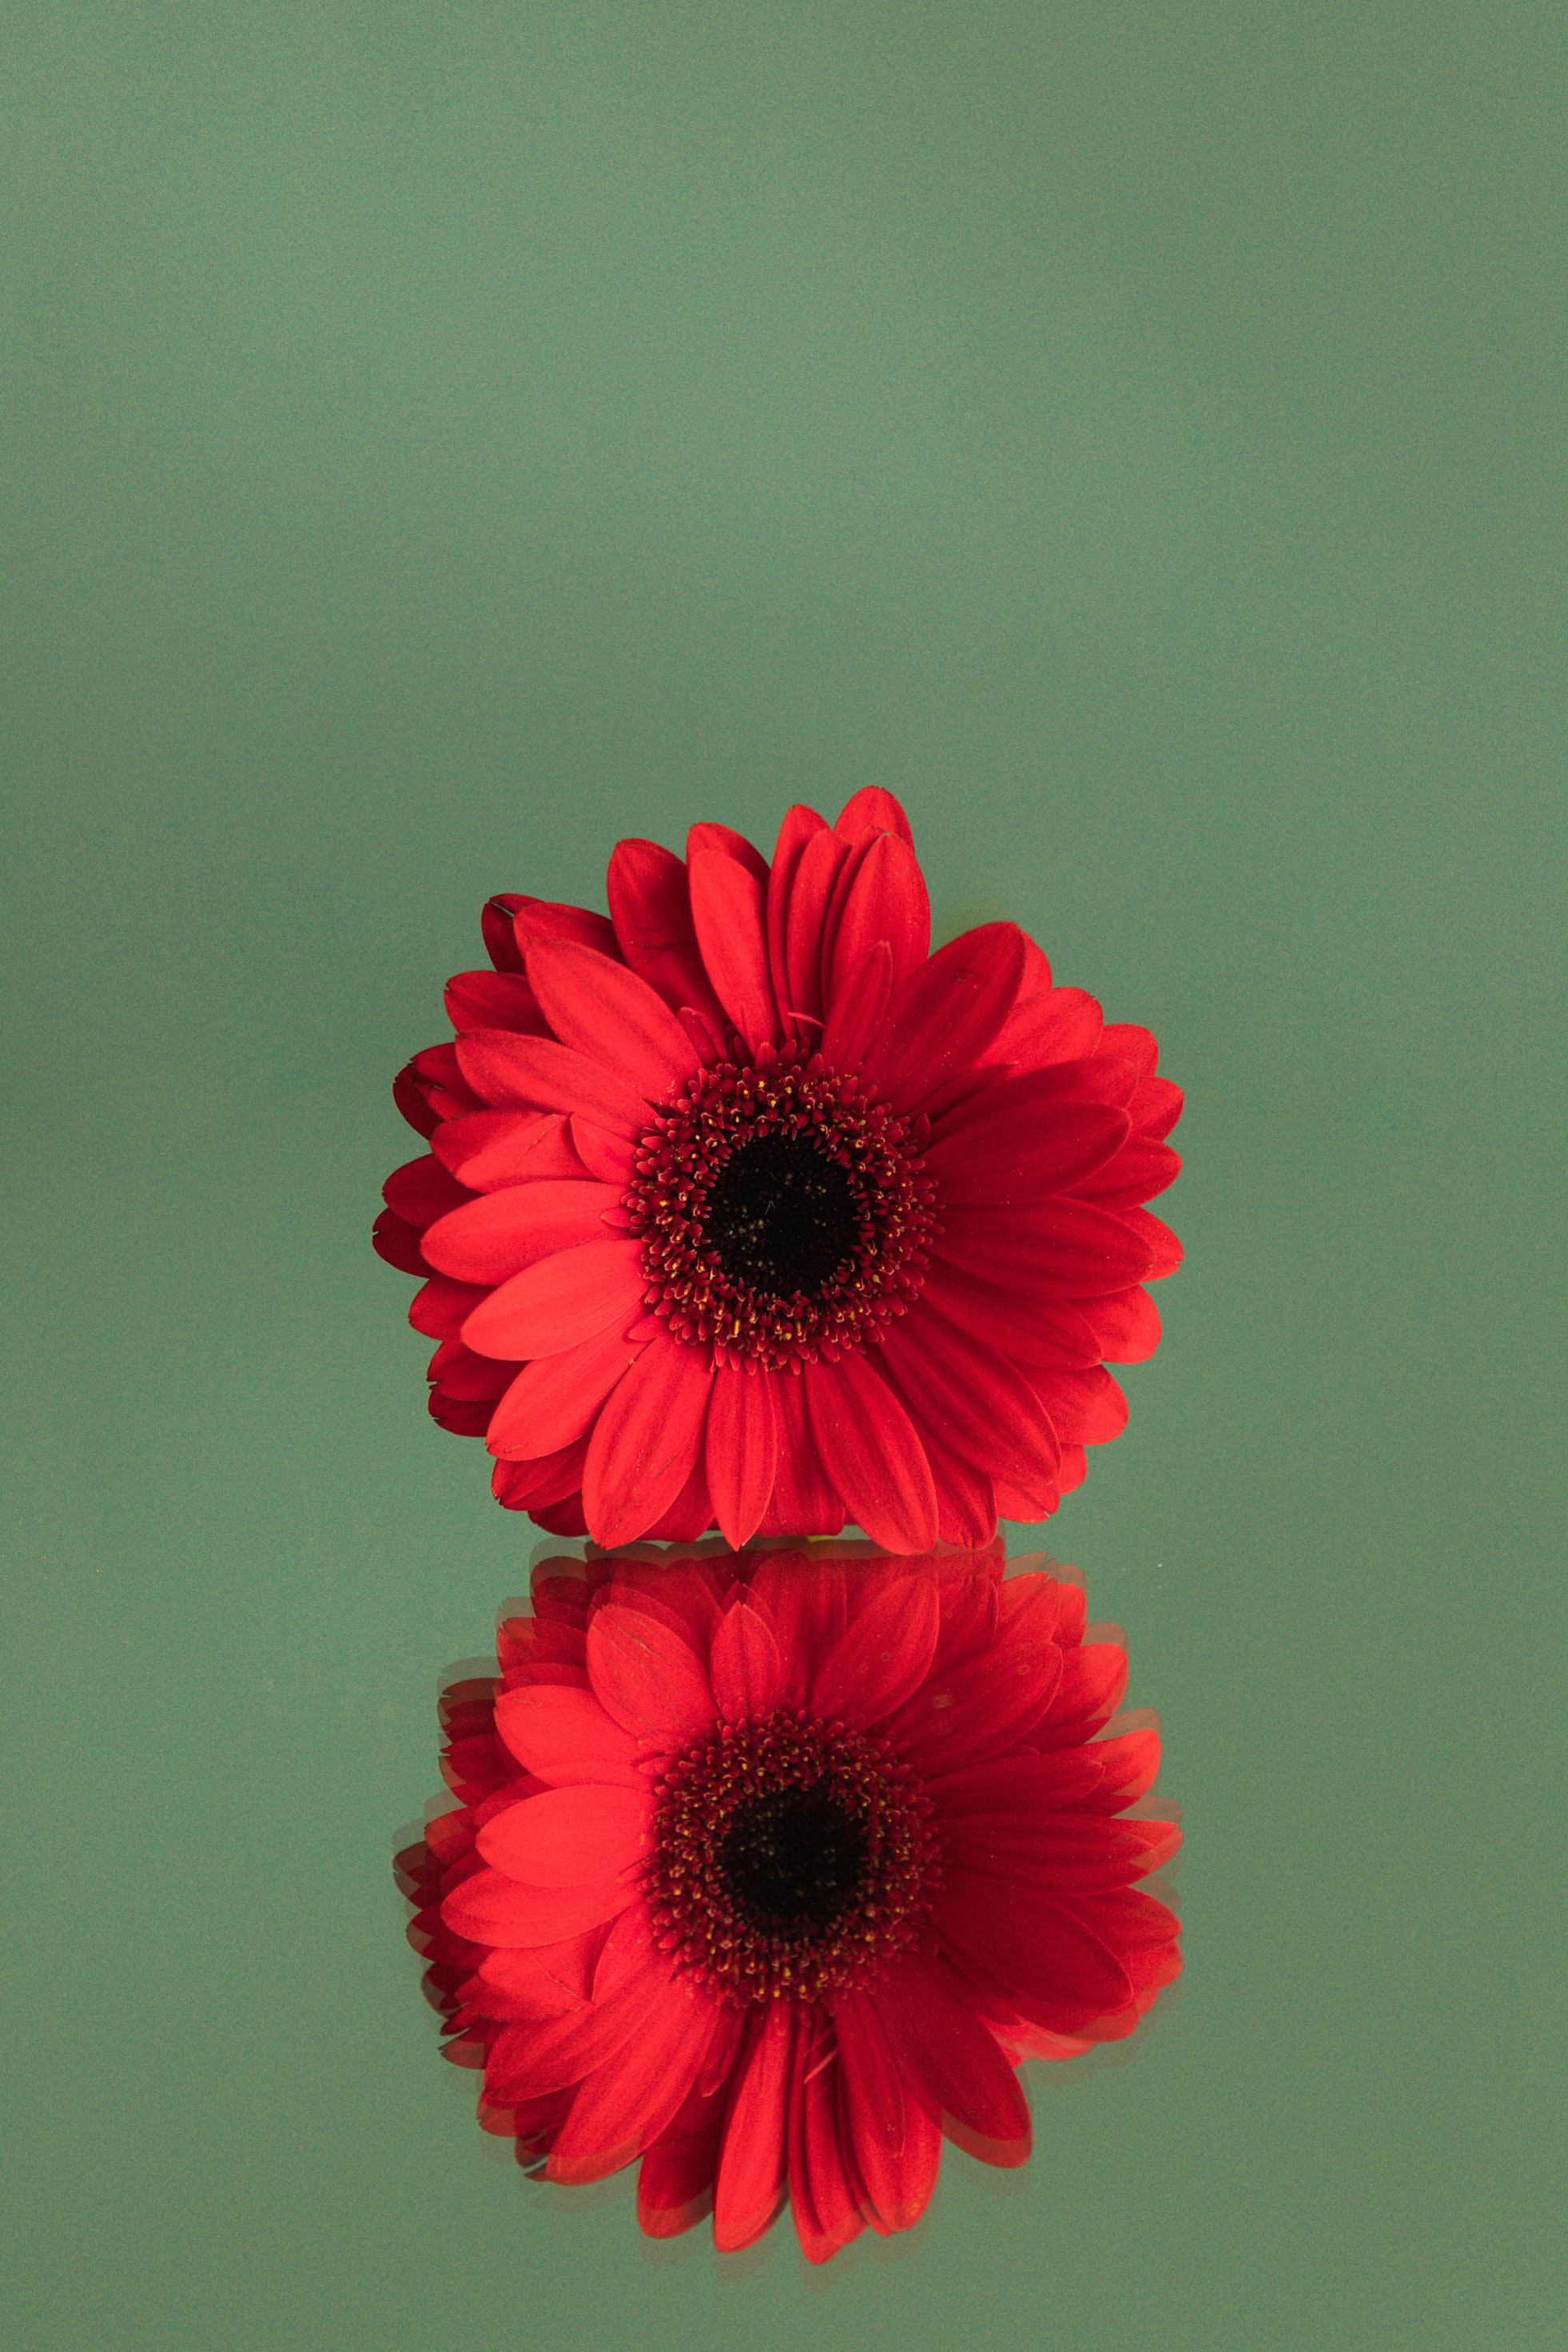 75447 download wallpaper red, reflection, flower, minimalism, gerbera screensavers and pictures for free